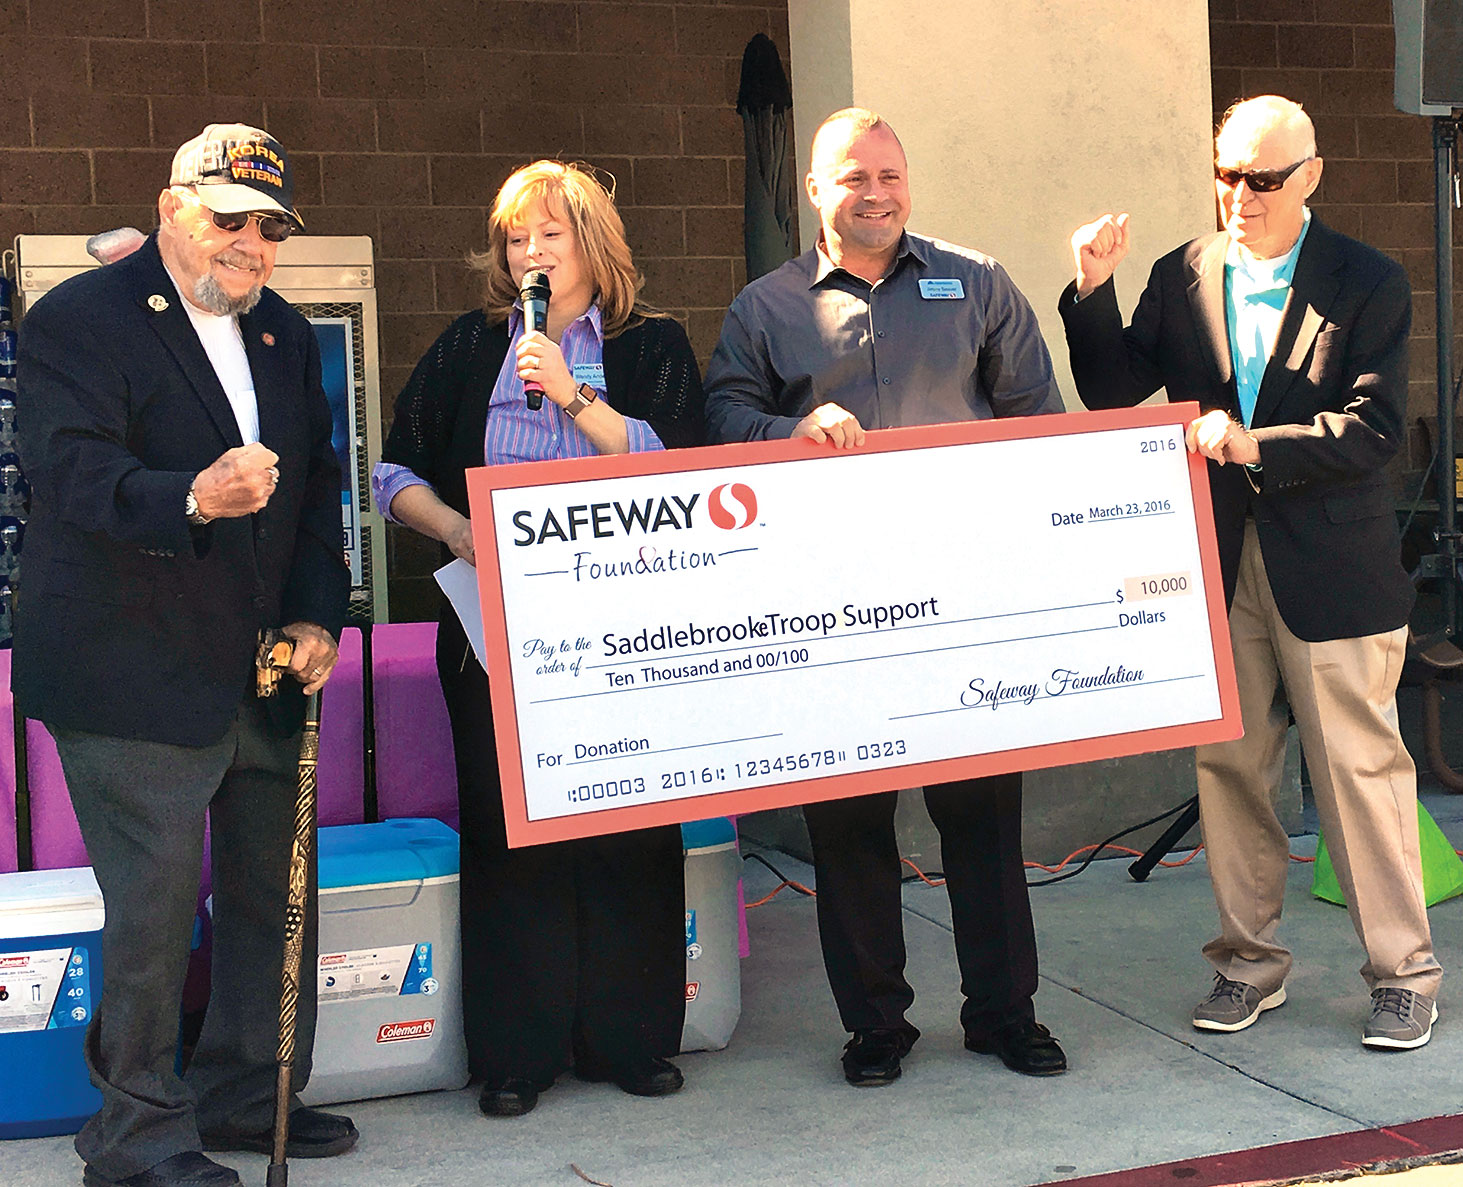 Safeway Store Manager Wendy Anderson and District Manager Jimmy Seaver present check to SaddleBrooke Troop Support President George Bidwell and Moose Creighton, announcing STS would receive an additional $5,000 grant award.